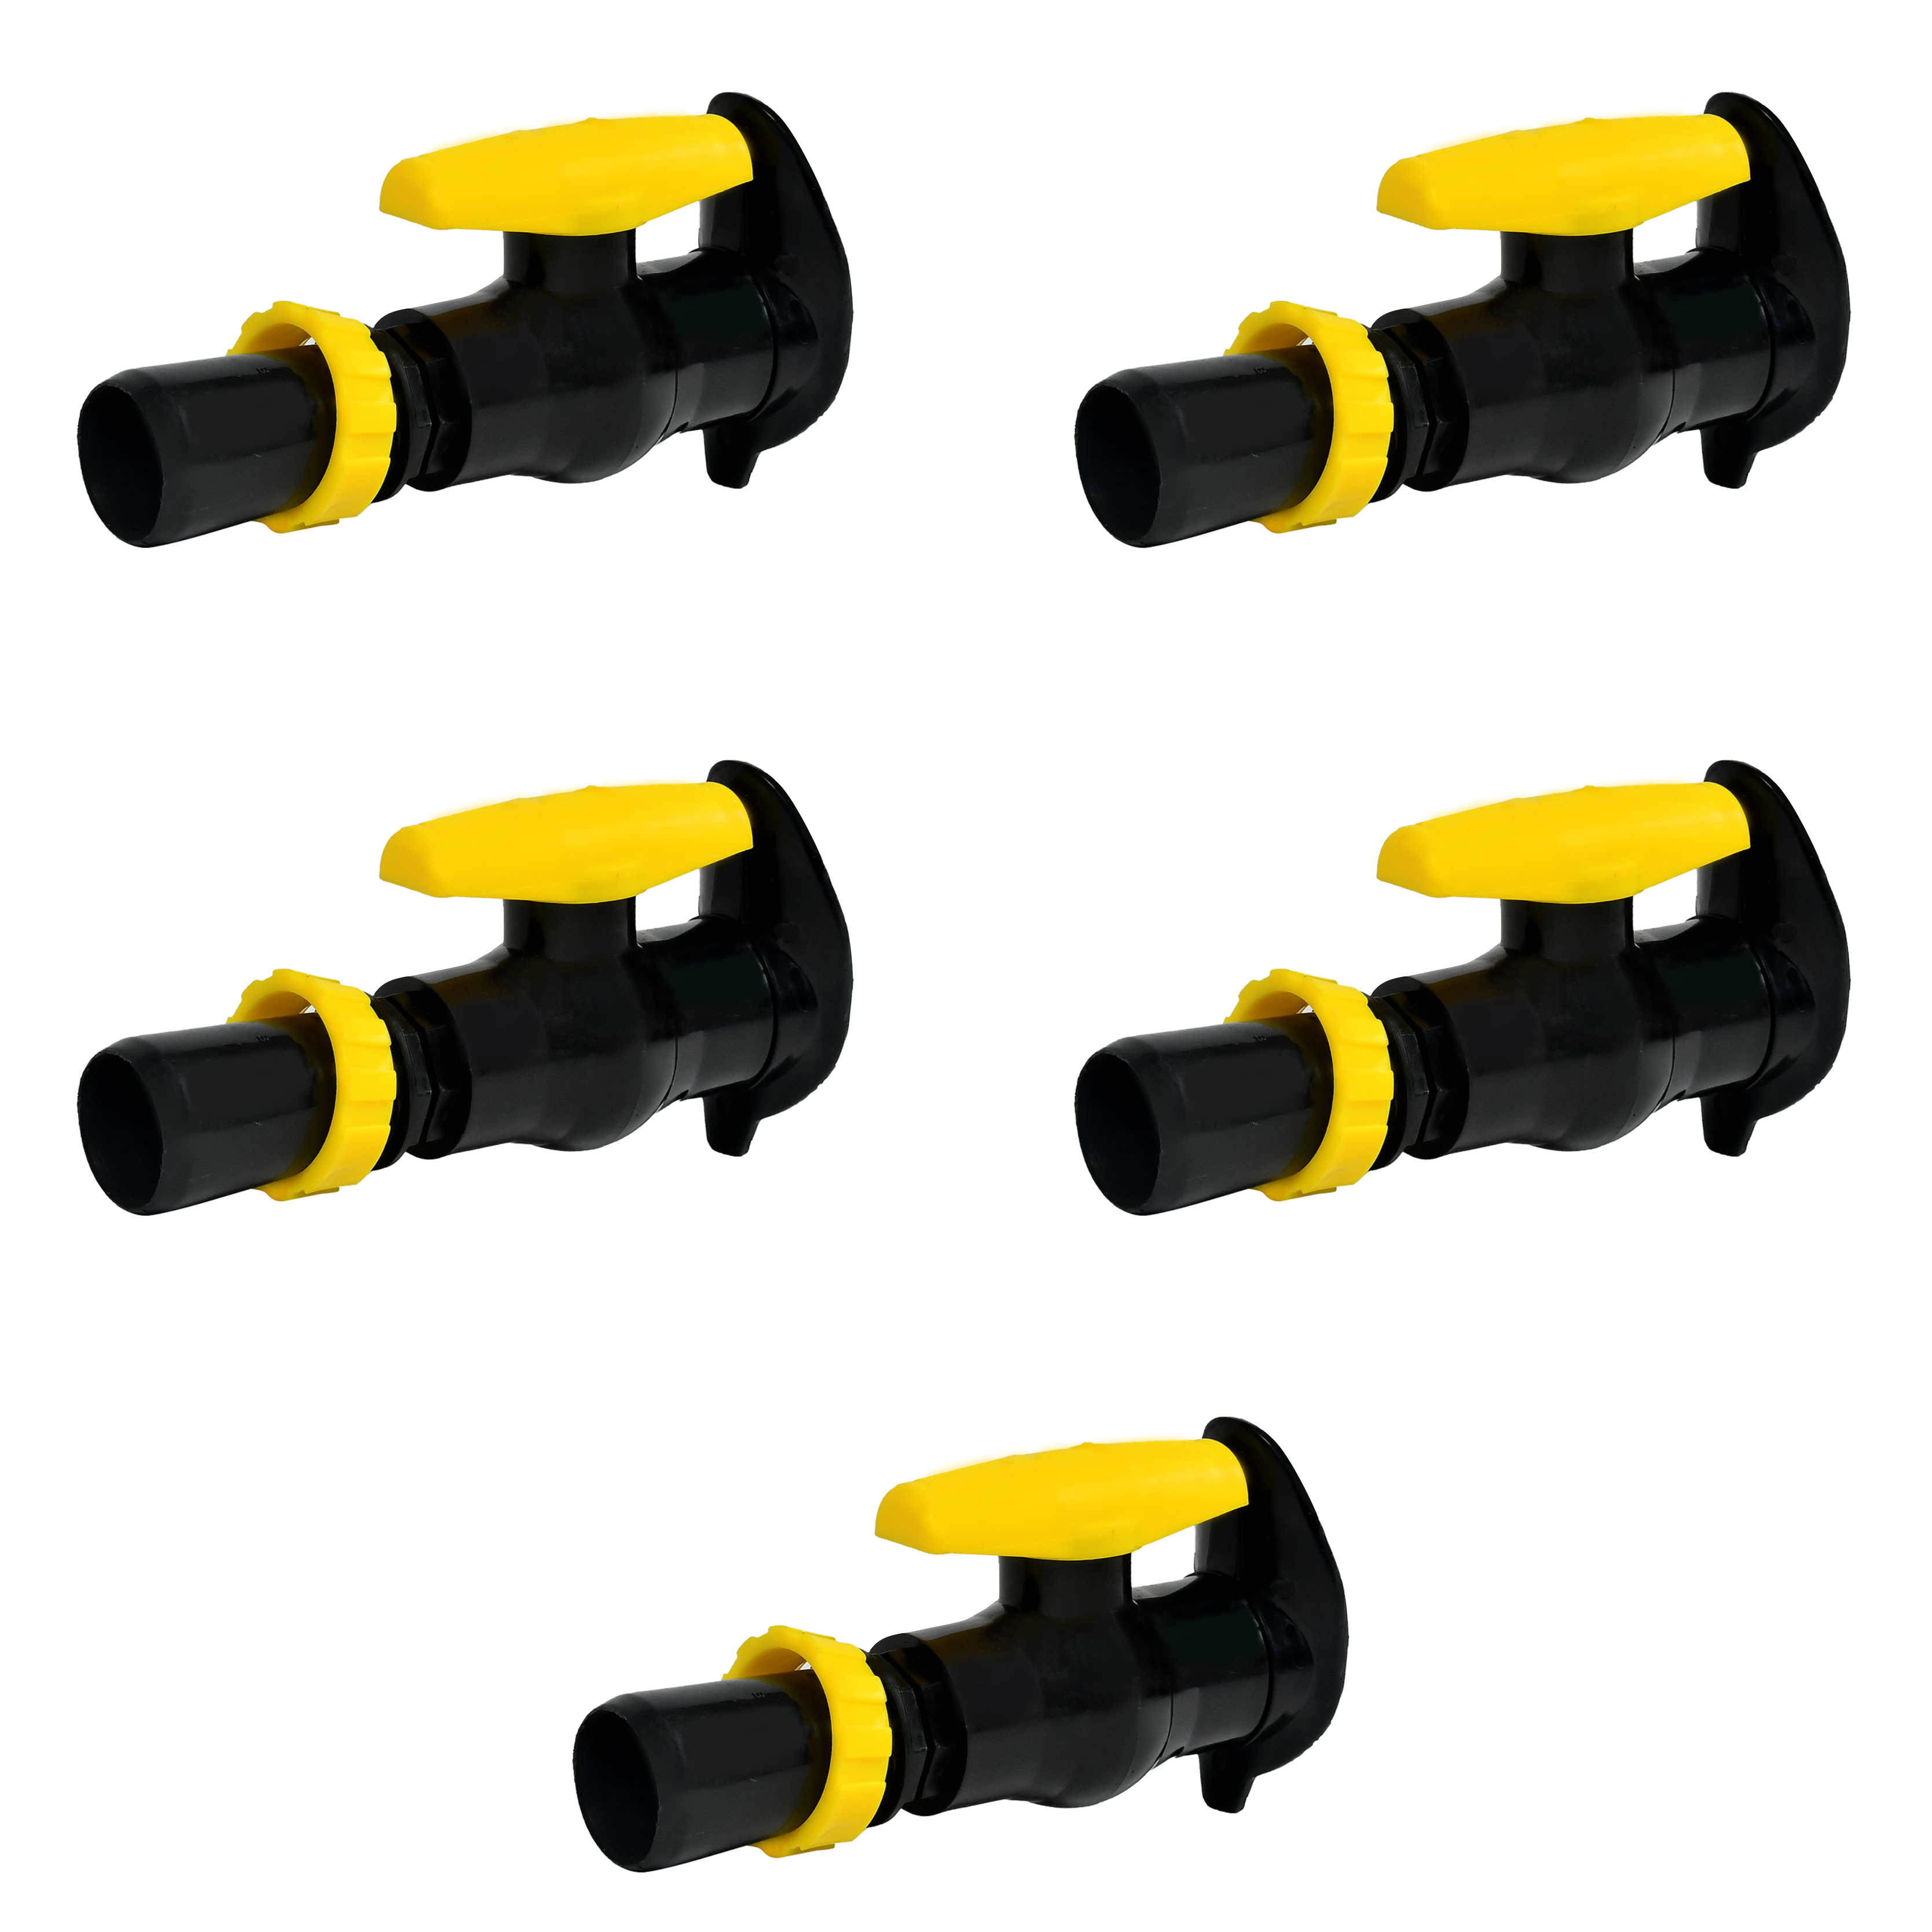  Connector (Pack of 5)-40 MM